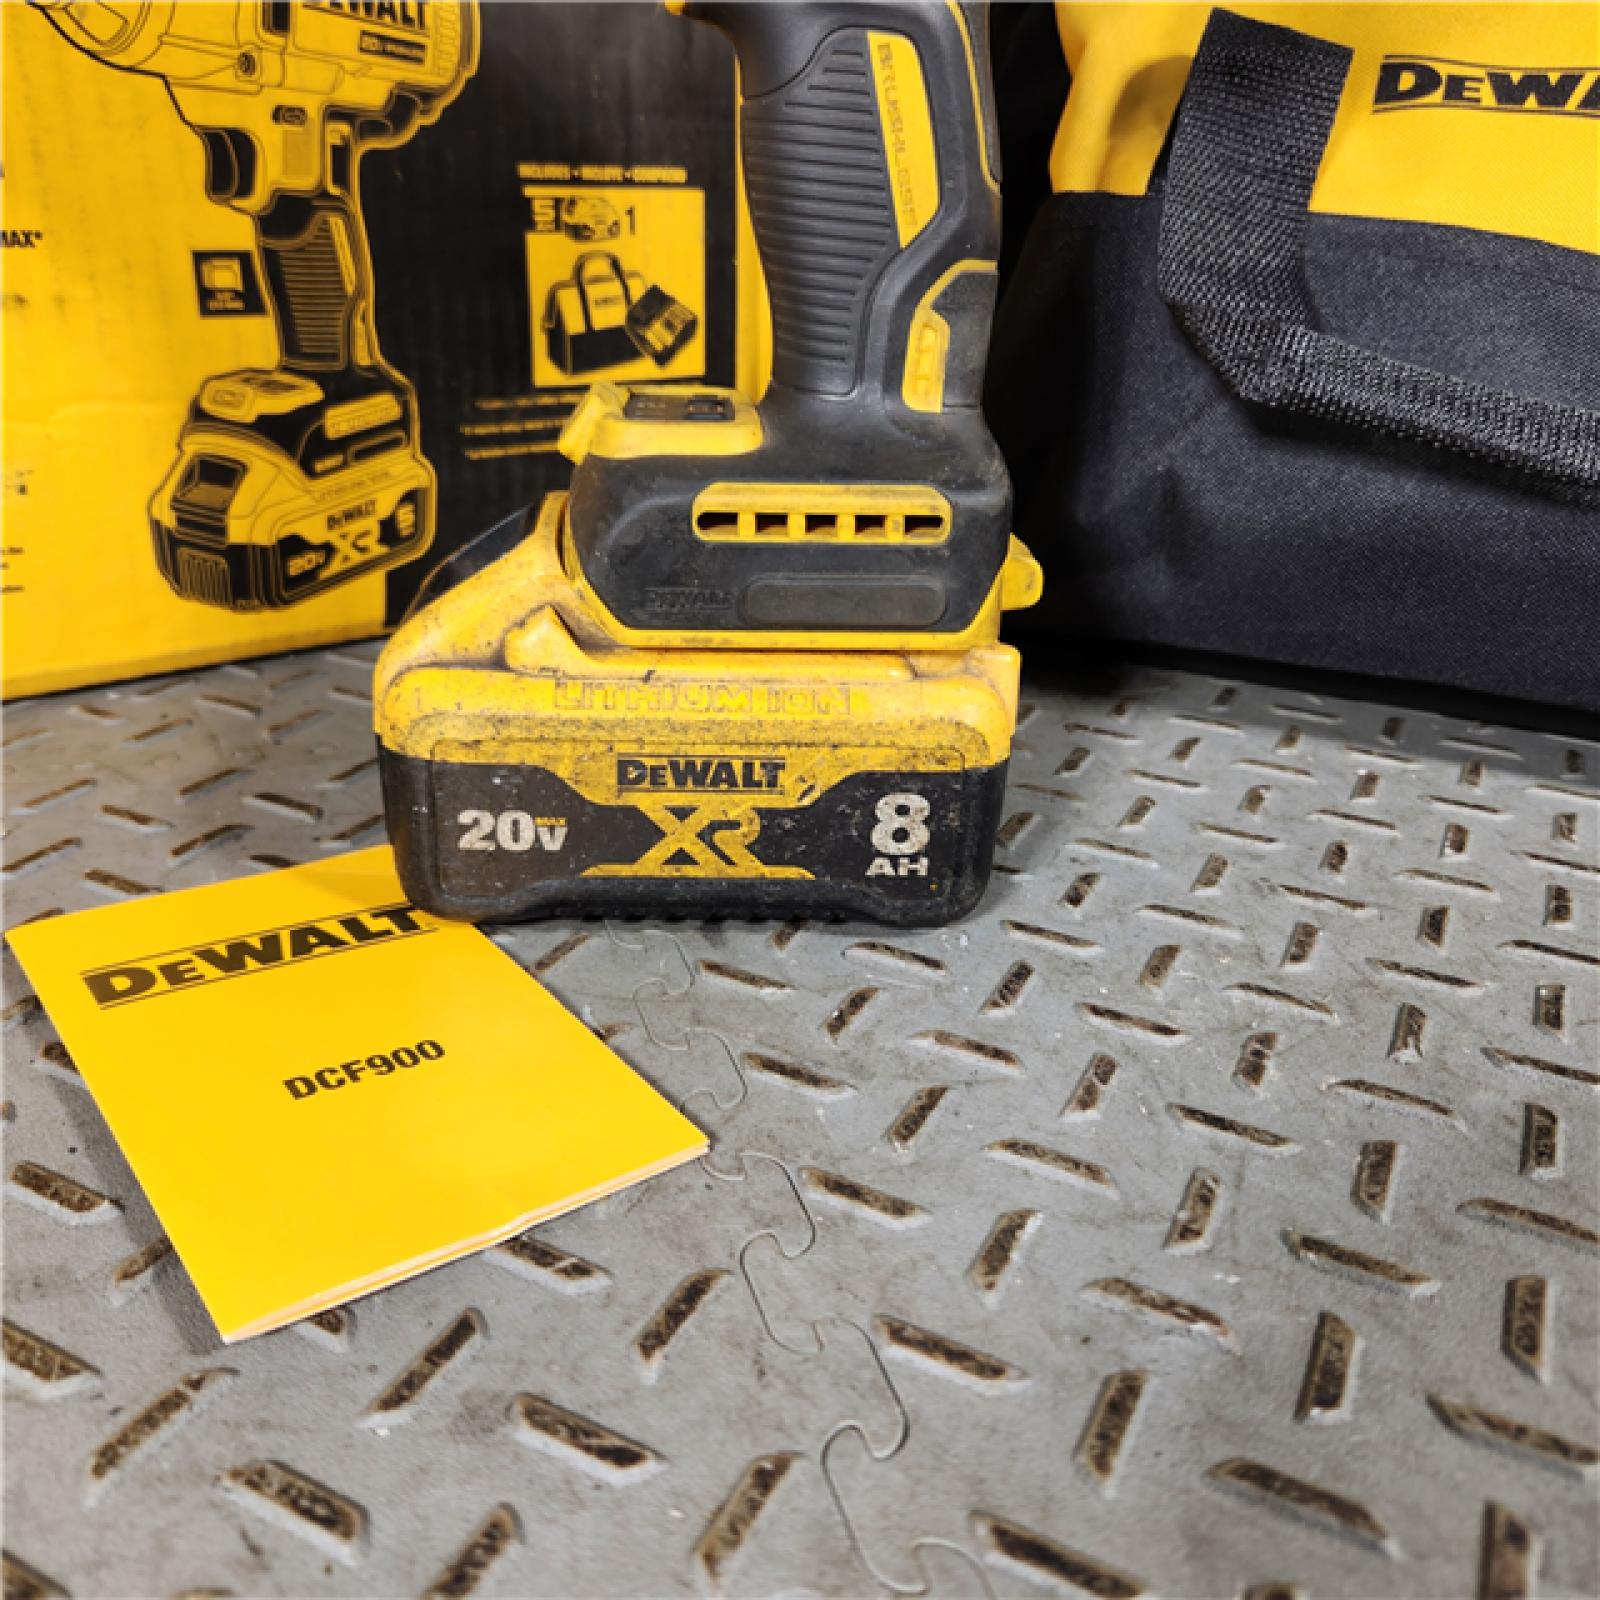 Houston location- AS-IS DeWalt 20 V 1/2 in. Cordless Brushless Impact Wrench W/Hog Ring Kit (Battery & Charger) Appears in used condition